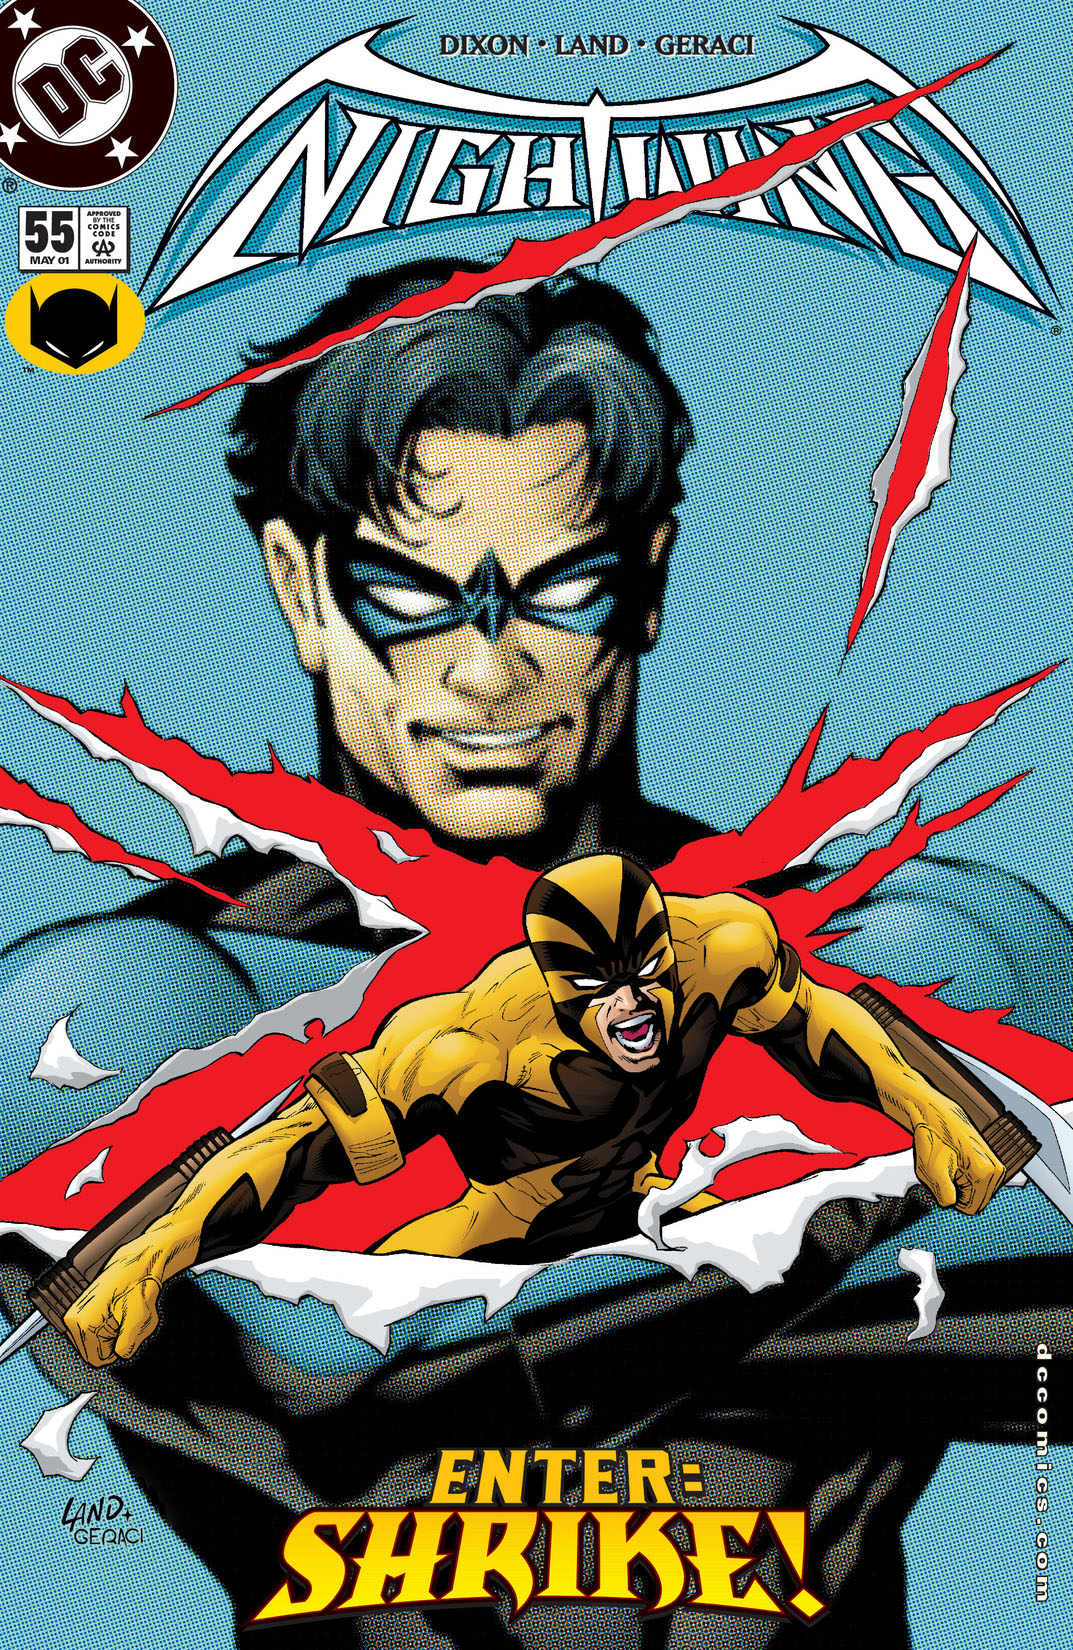 Nightwing (1996-) #55 preview images